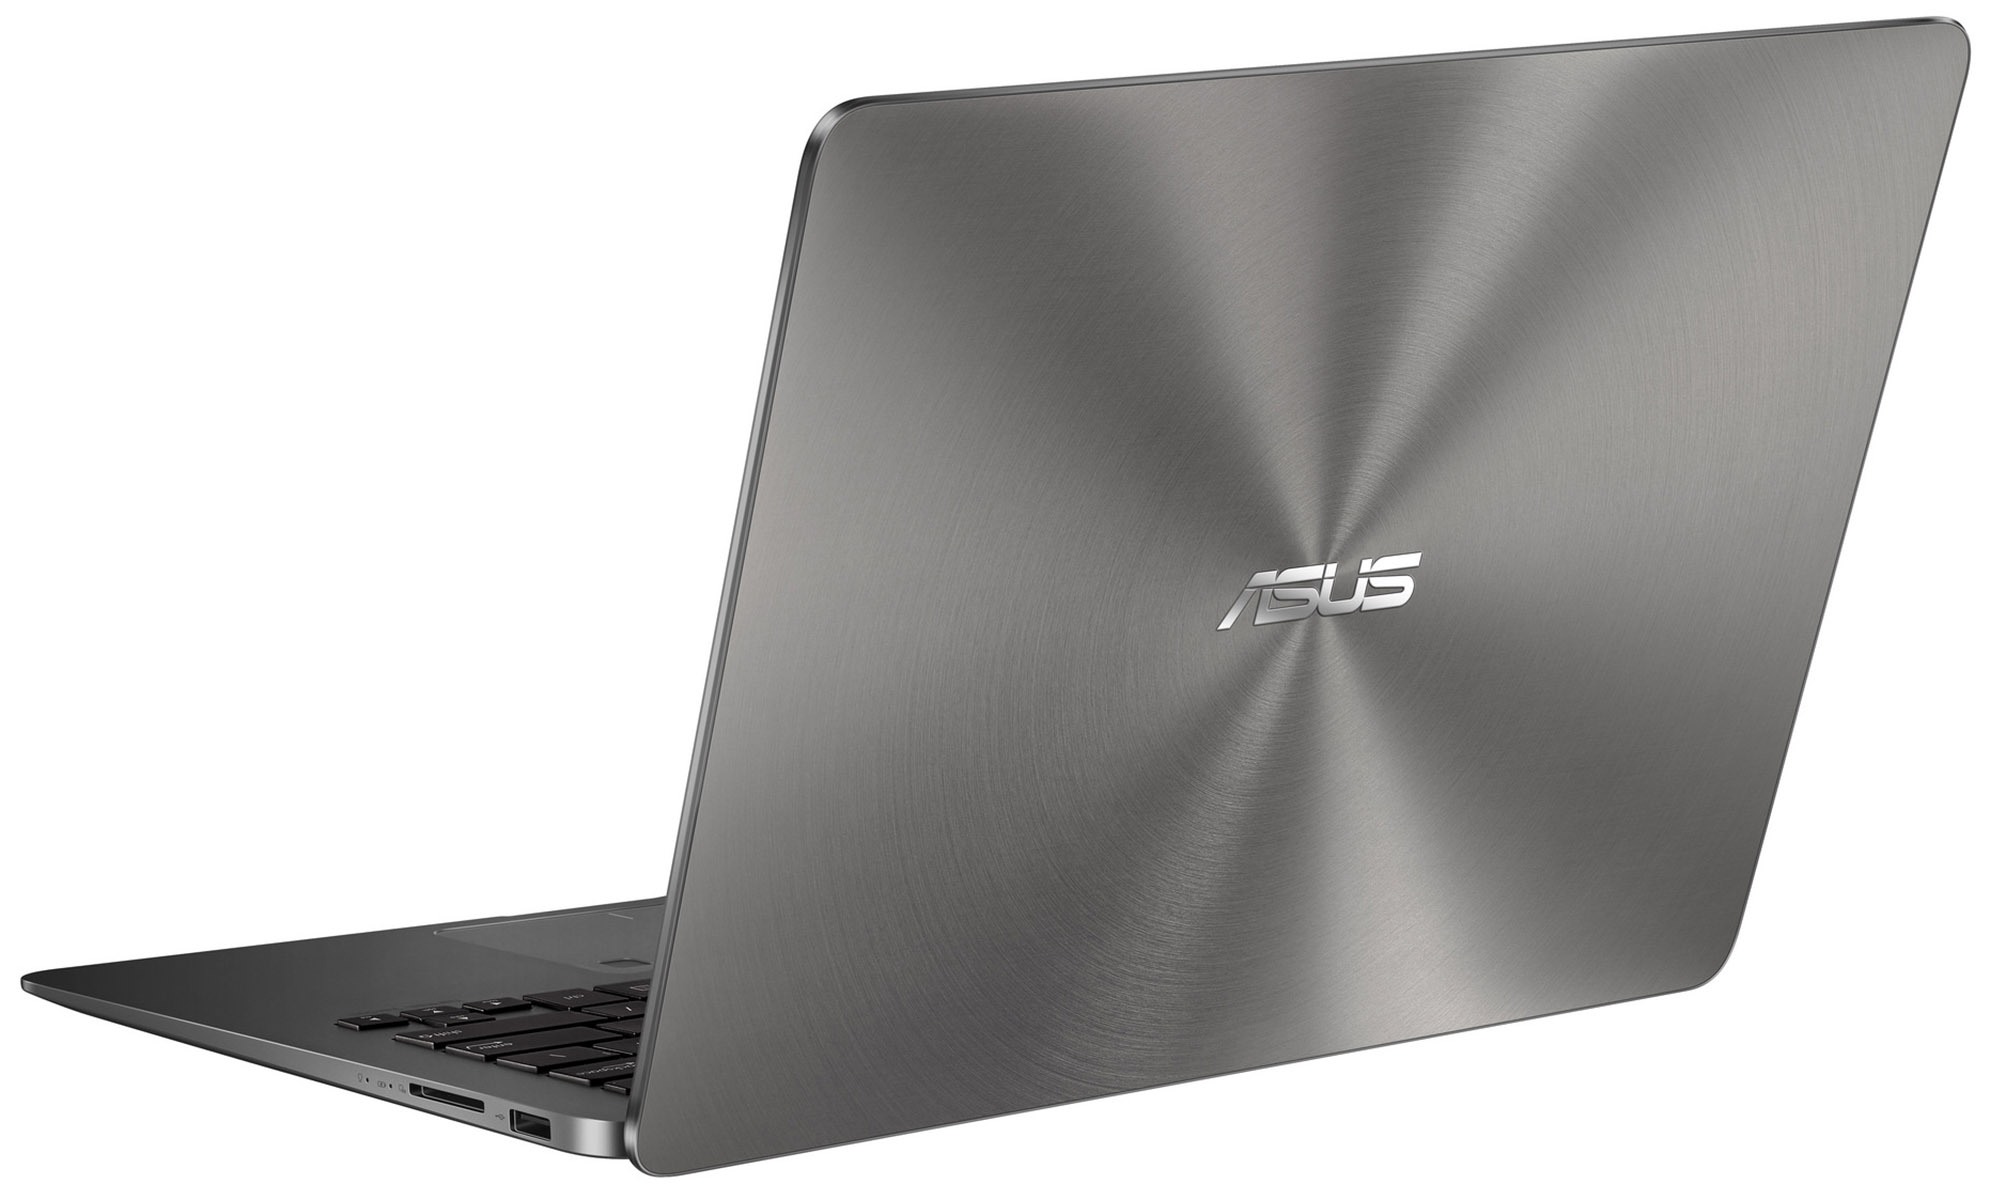 ASUS ZenBook UX430 - Specs, Tests, and Prices | LaptopMedia Canada